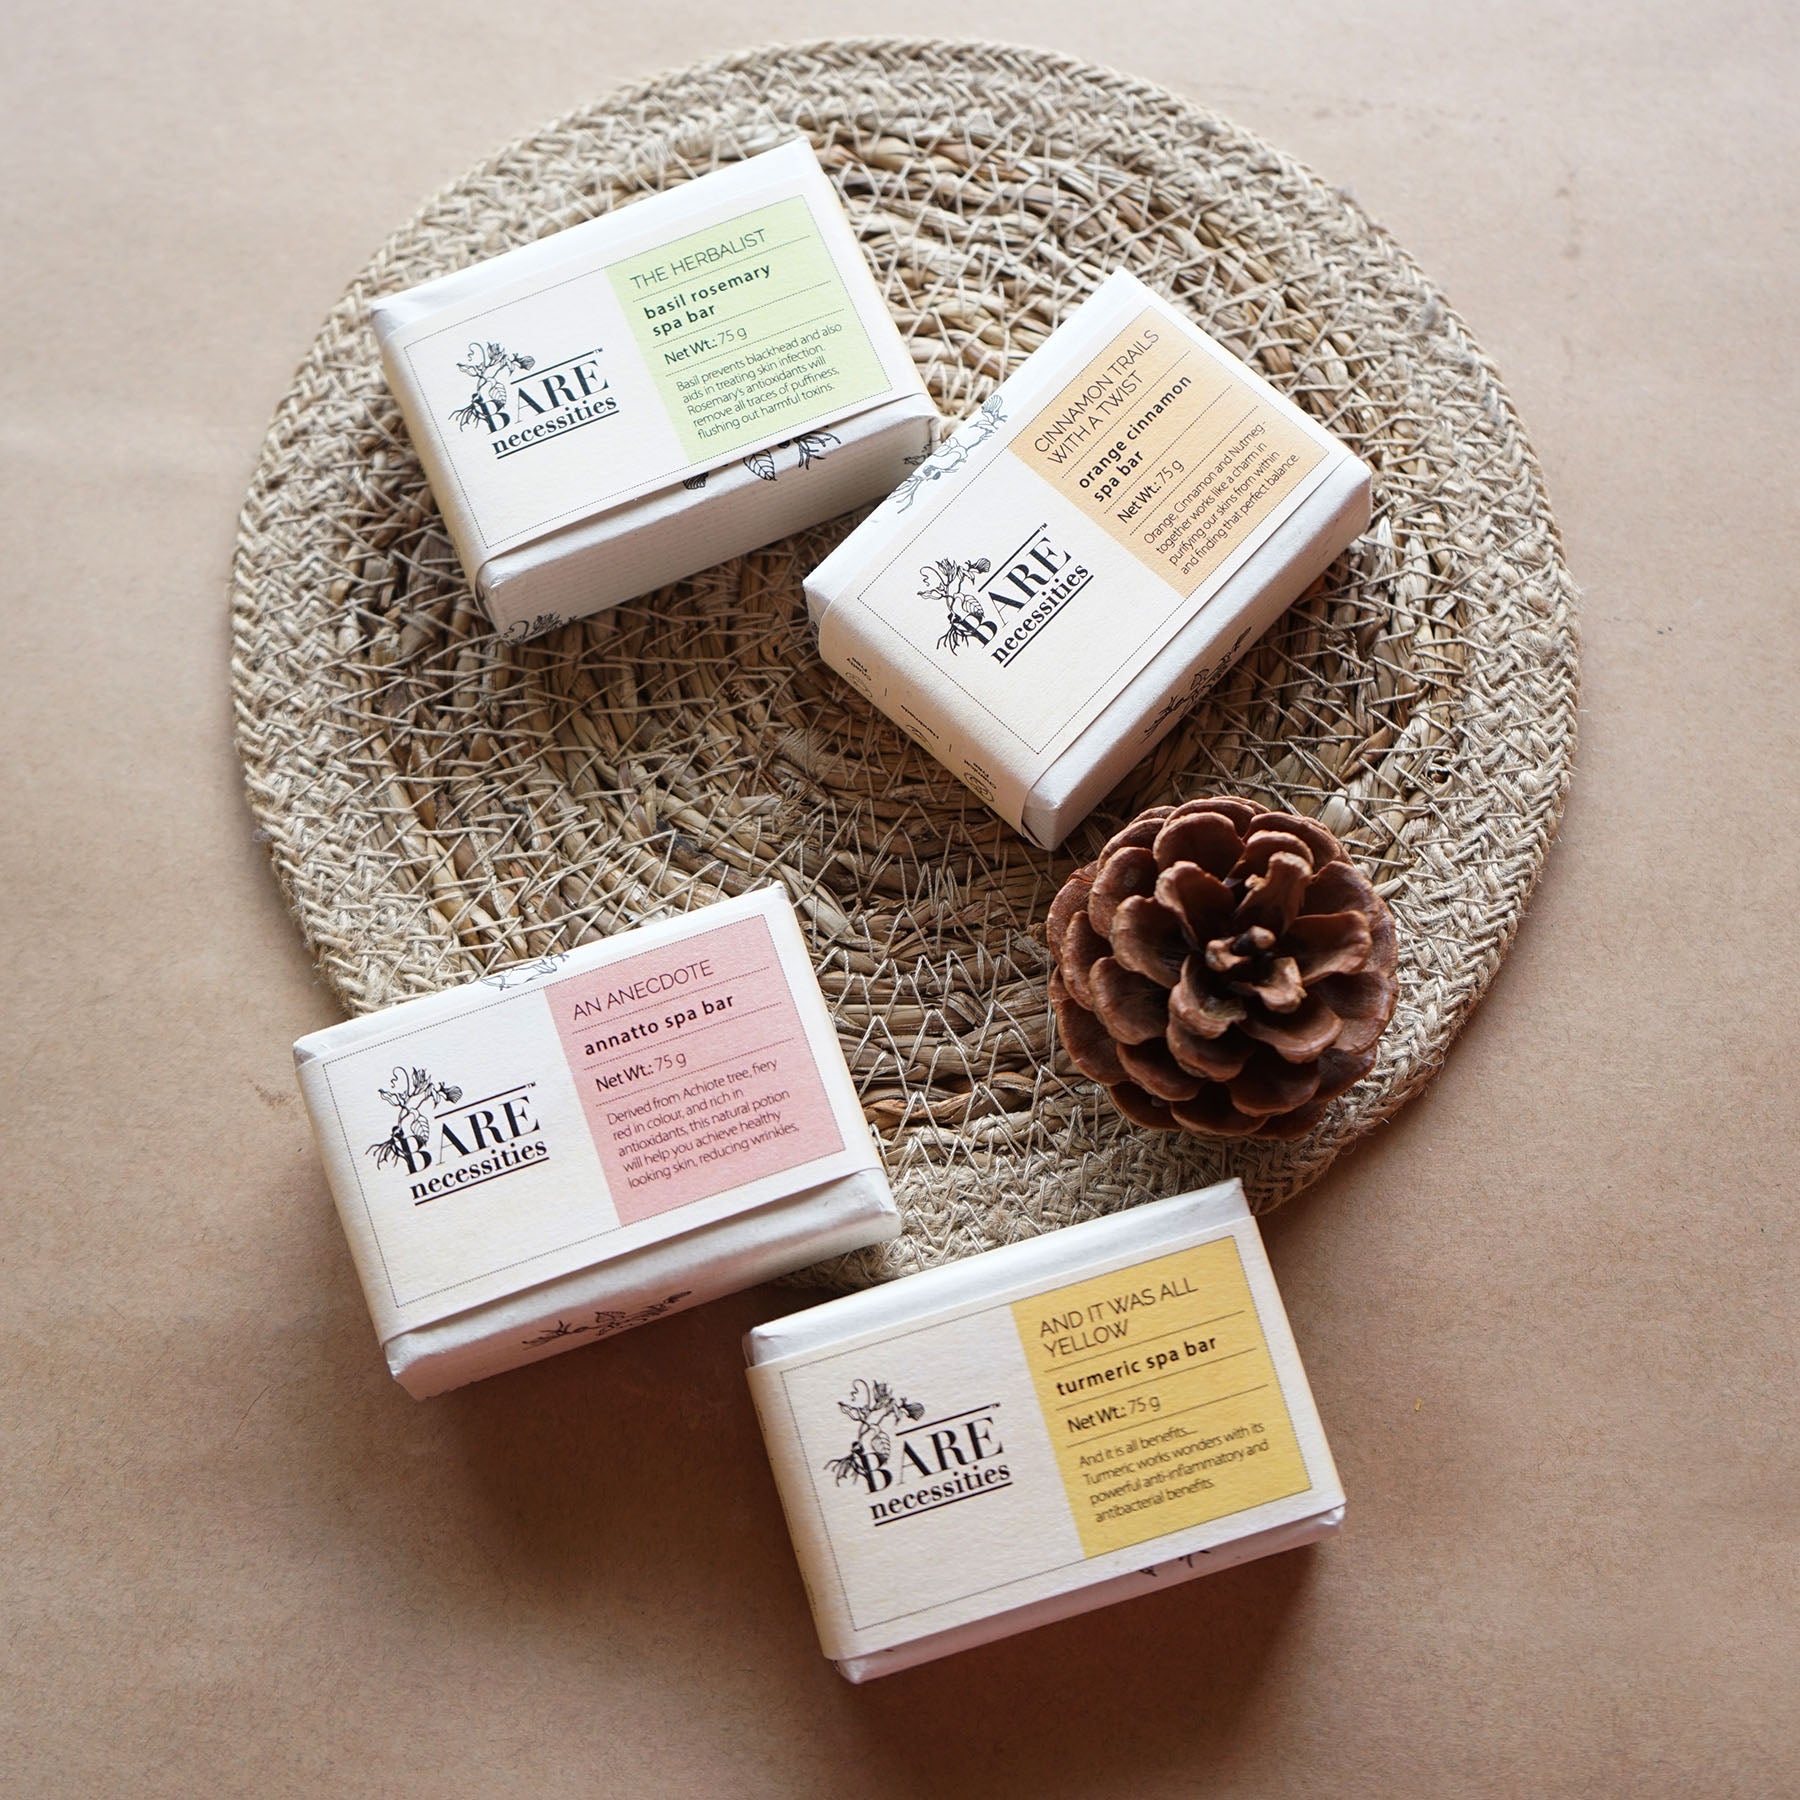 Bare Necessities Pack of 4 Natural Exfoliating Soap Bars